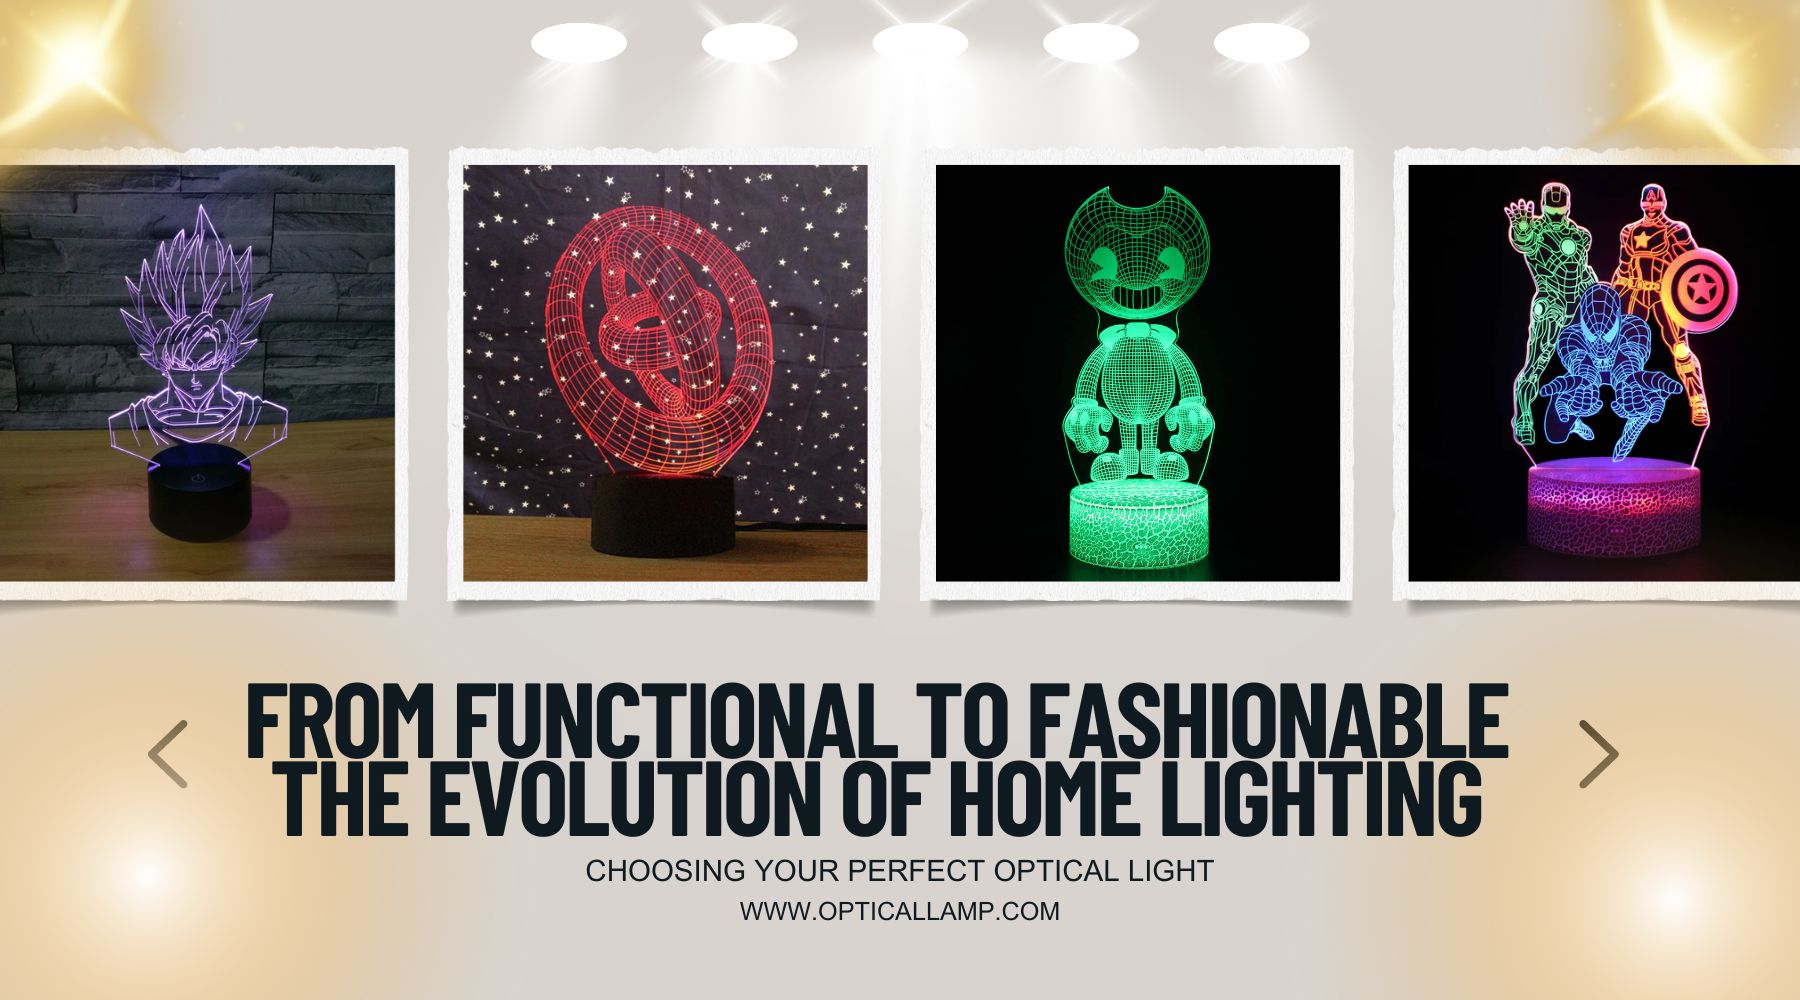 From Functional to Fashionable: The Evolution of Home Lighting